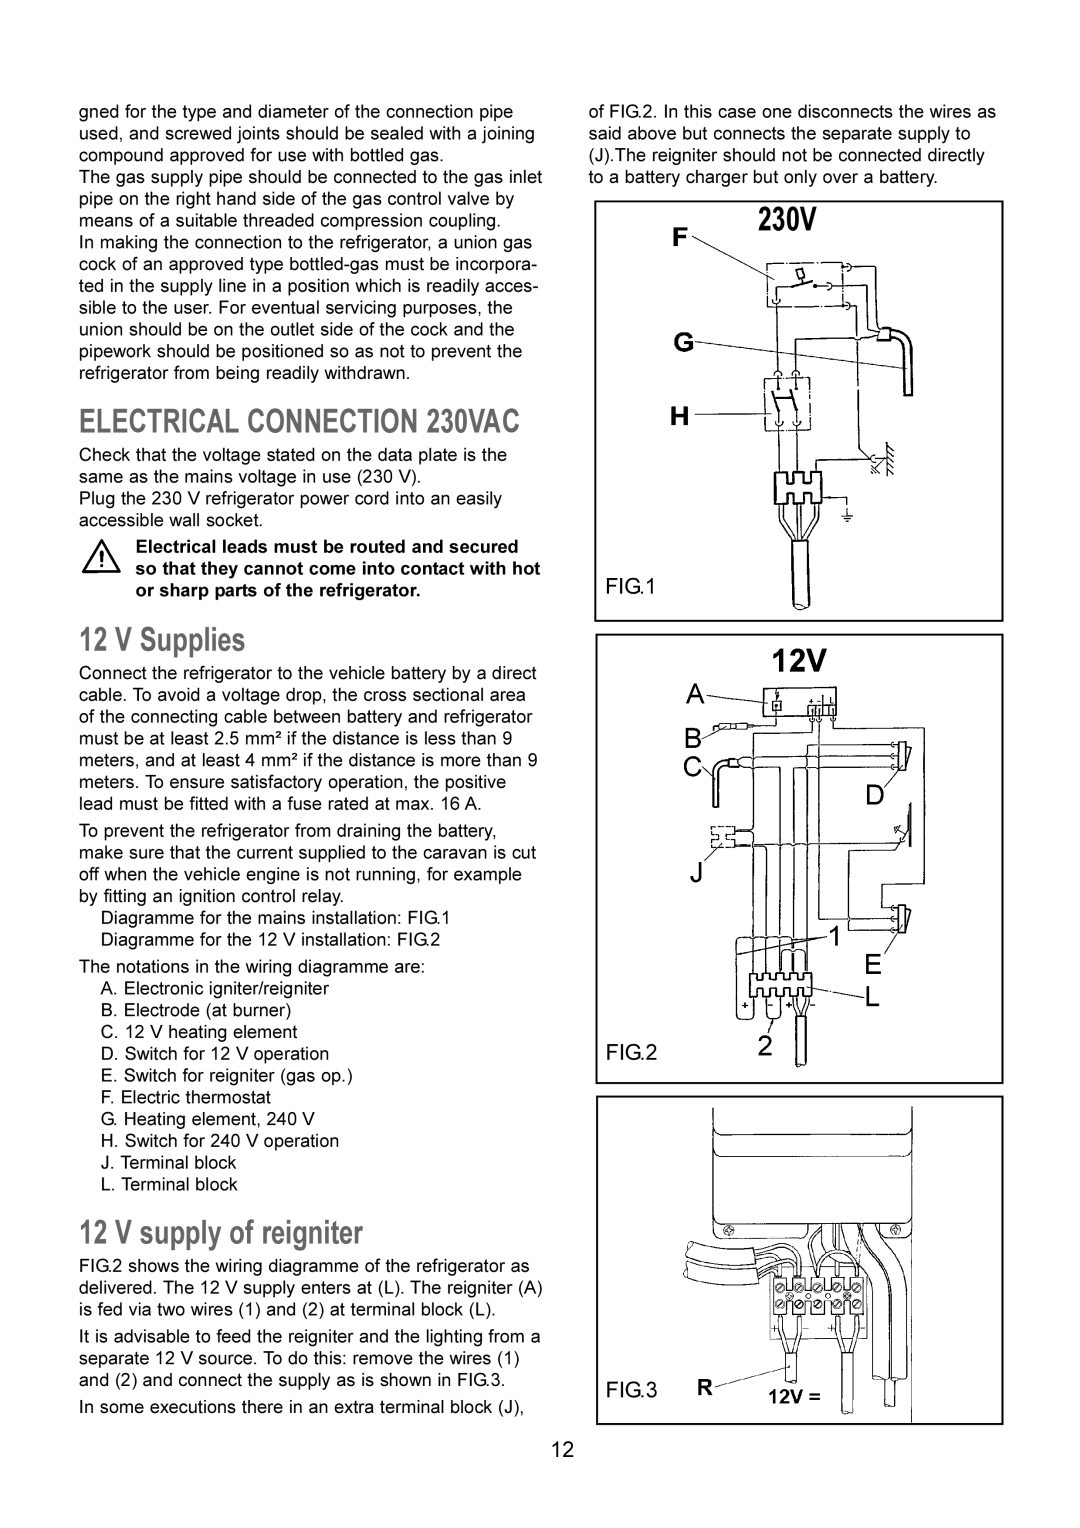 Dometic RM 4361DM, RM 4361NDM manual V Supplies, V supply of reigniter, ELECTRICAL CONNECTION 230VAC 